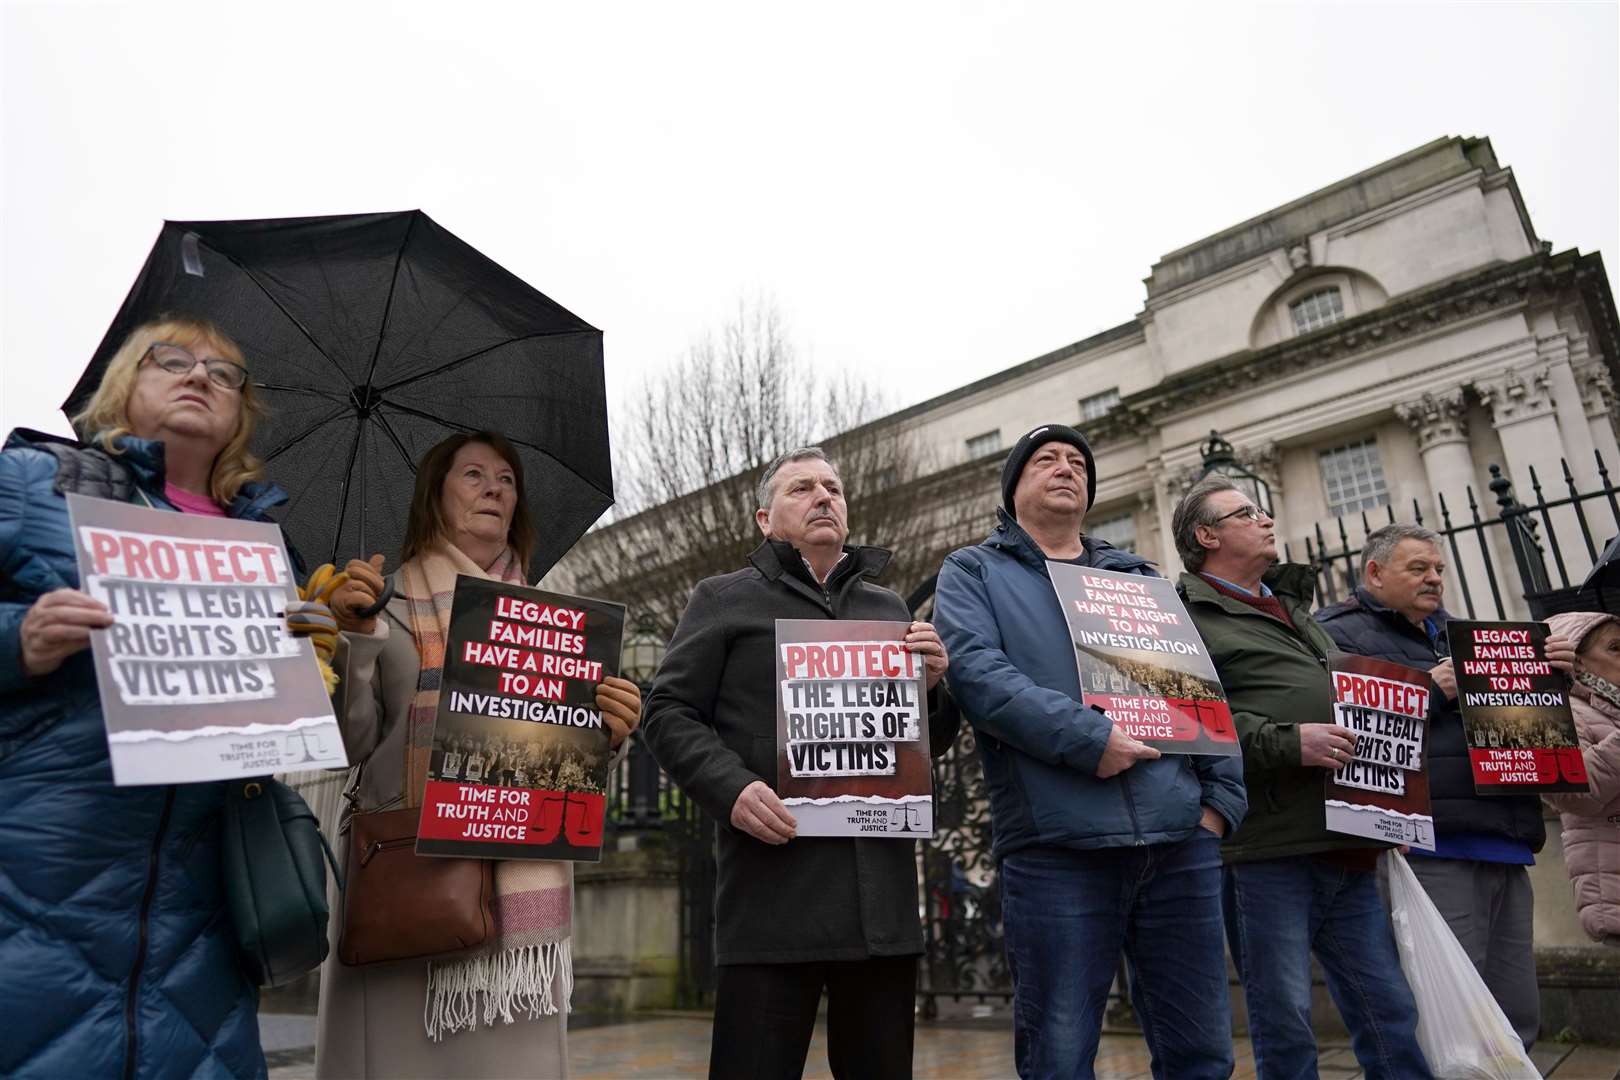 Campaigners outside Belfast High Court ahead of its decision in a landmark legal challenge to the UK government’s Troubles Act brought by several victims of the Northern Ireland conflict (Brian Lawless/PA)